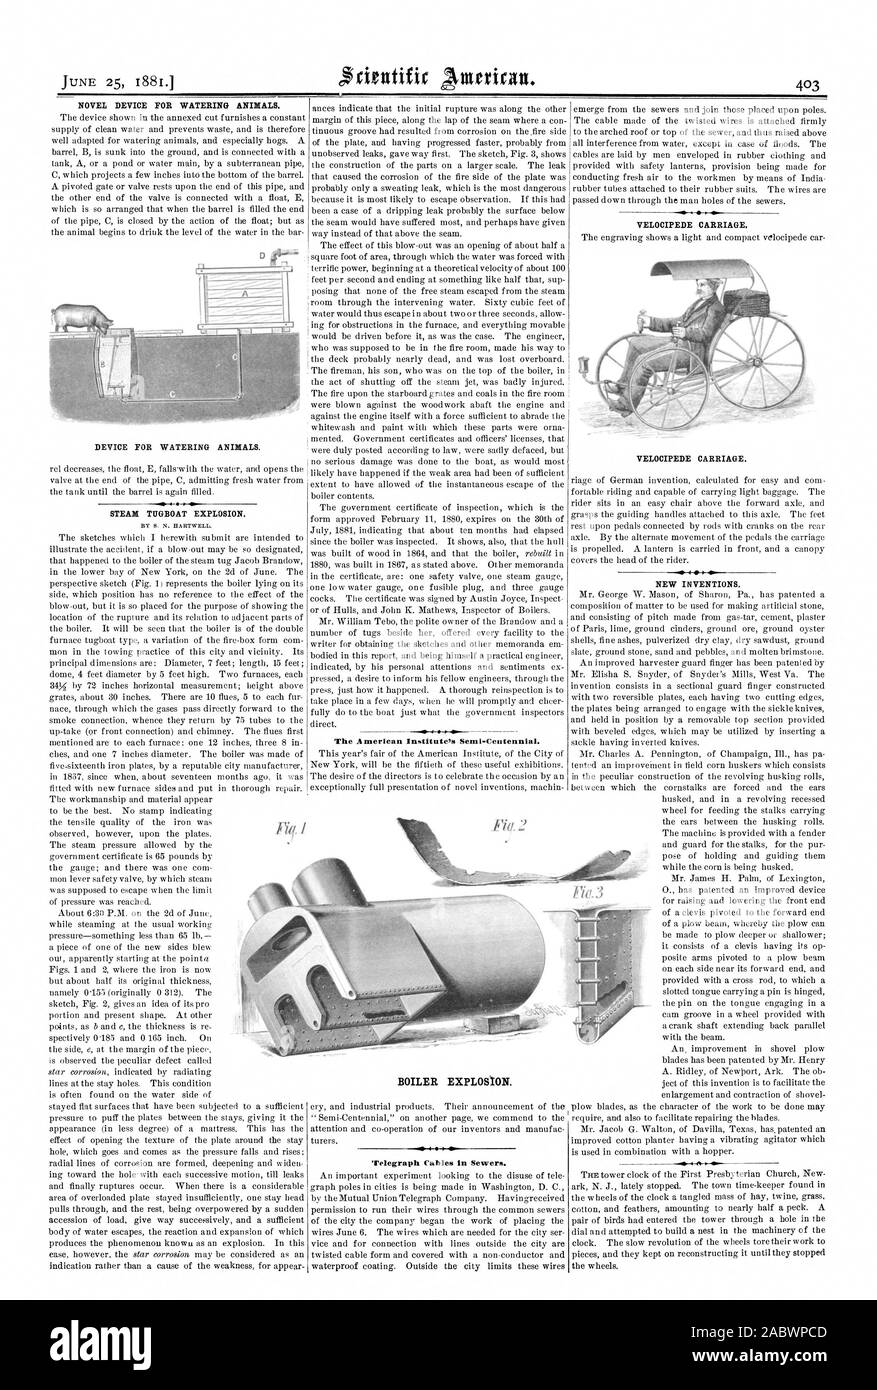 NOVEL DEVICE FOR WATERING ANIMALS. DEVICE FOR WATERING ANIMALS. STEAM TUGBOAT EXPLOSION. Telegraph Cables in Sewers. NEW INVENTIONS. VELOCIPEDE CARRIAGE. VELOCIPEDE CARRIAGE. BOILER EXPLOSION., scientific american, 1881-06-25 Stock Photo